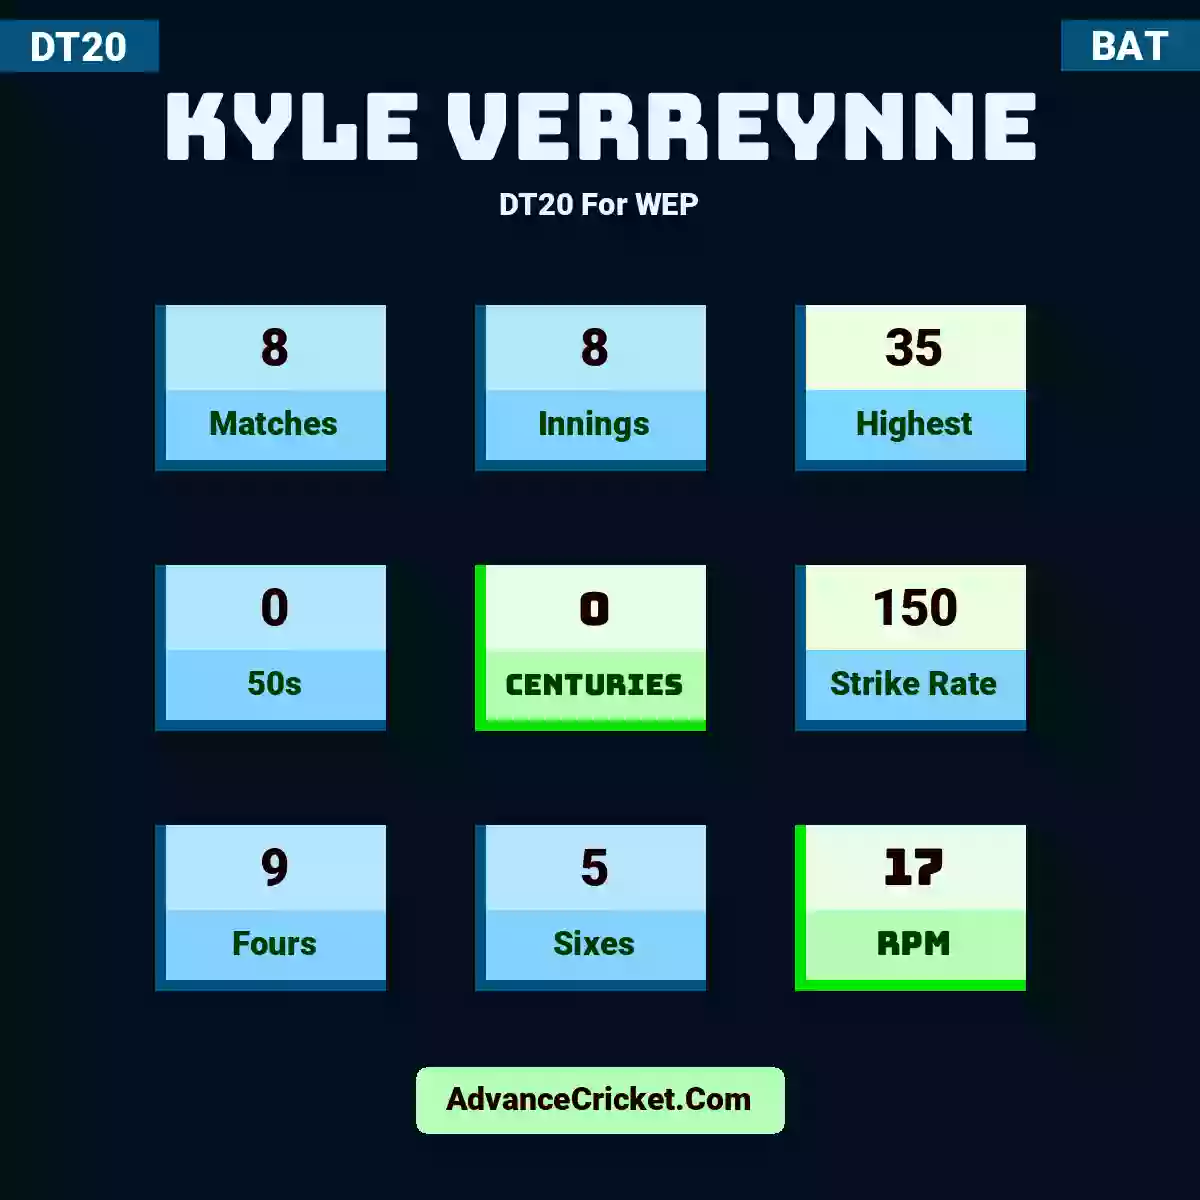 Kyle Verreynne DT20  For WEP, Kyle Verreynne played 8 matches, scored 35 runs as highest, 0 half-centuries, and 0 centuries, with a strike rate of 150. K.Verreynne hit 9 fours and 5 sixes, with an RPM of 17.